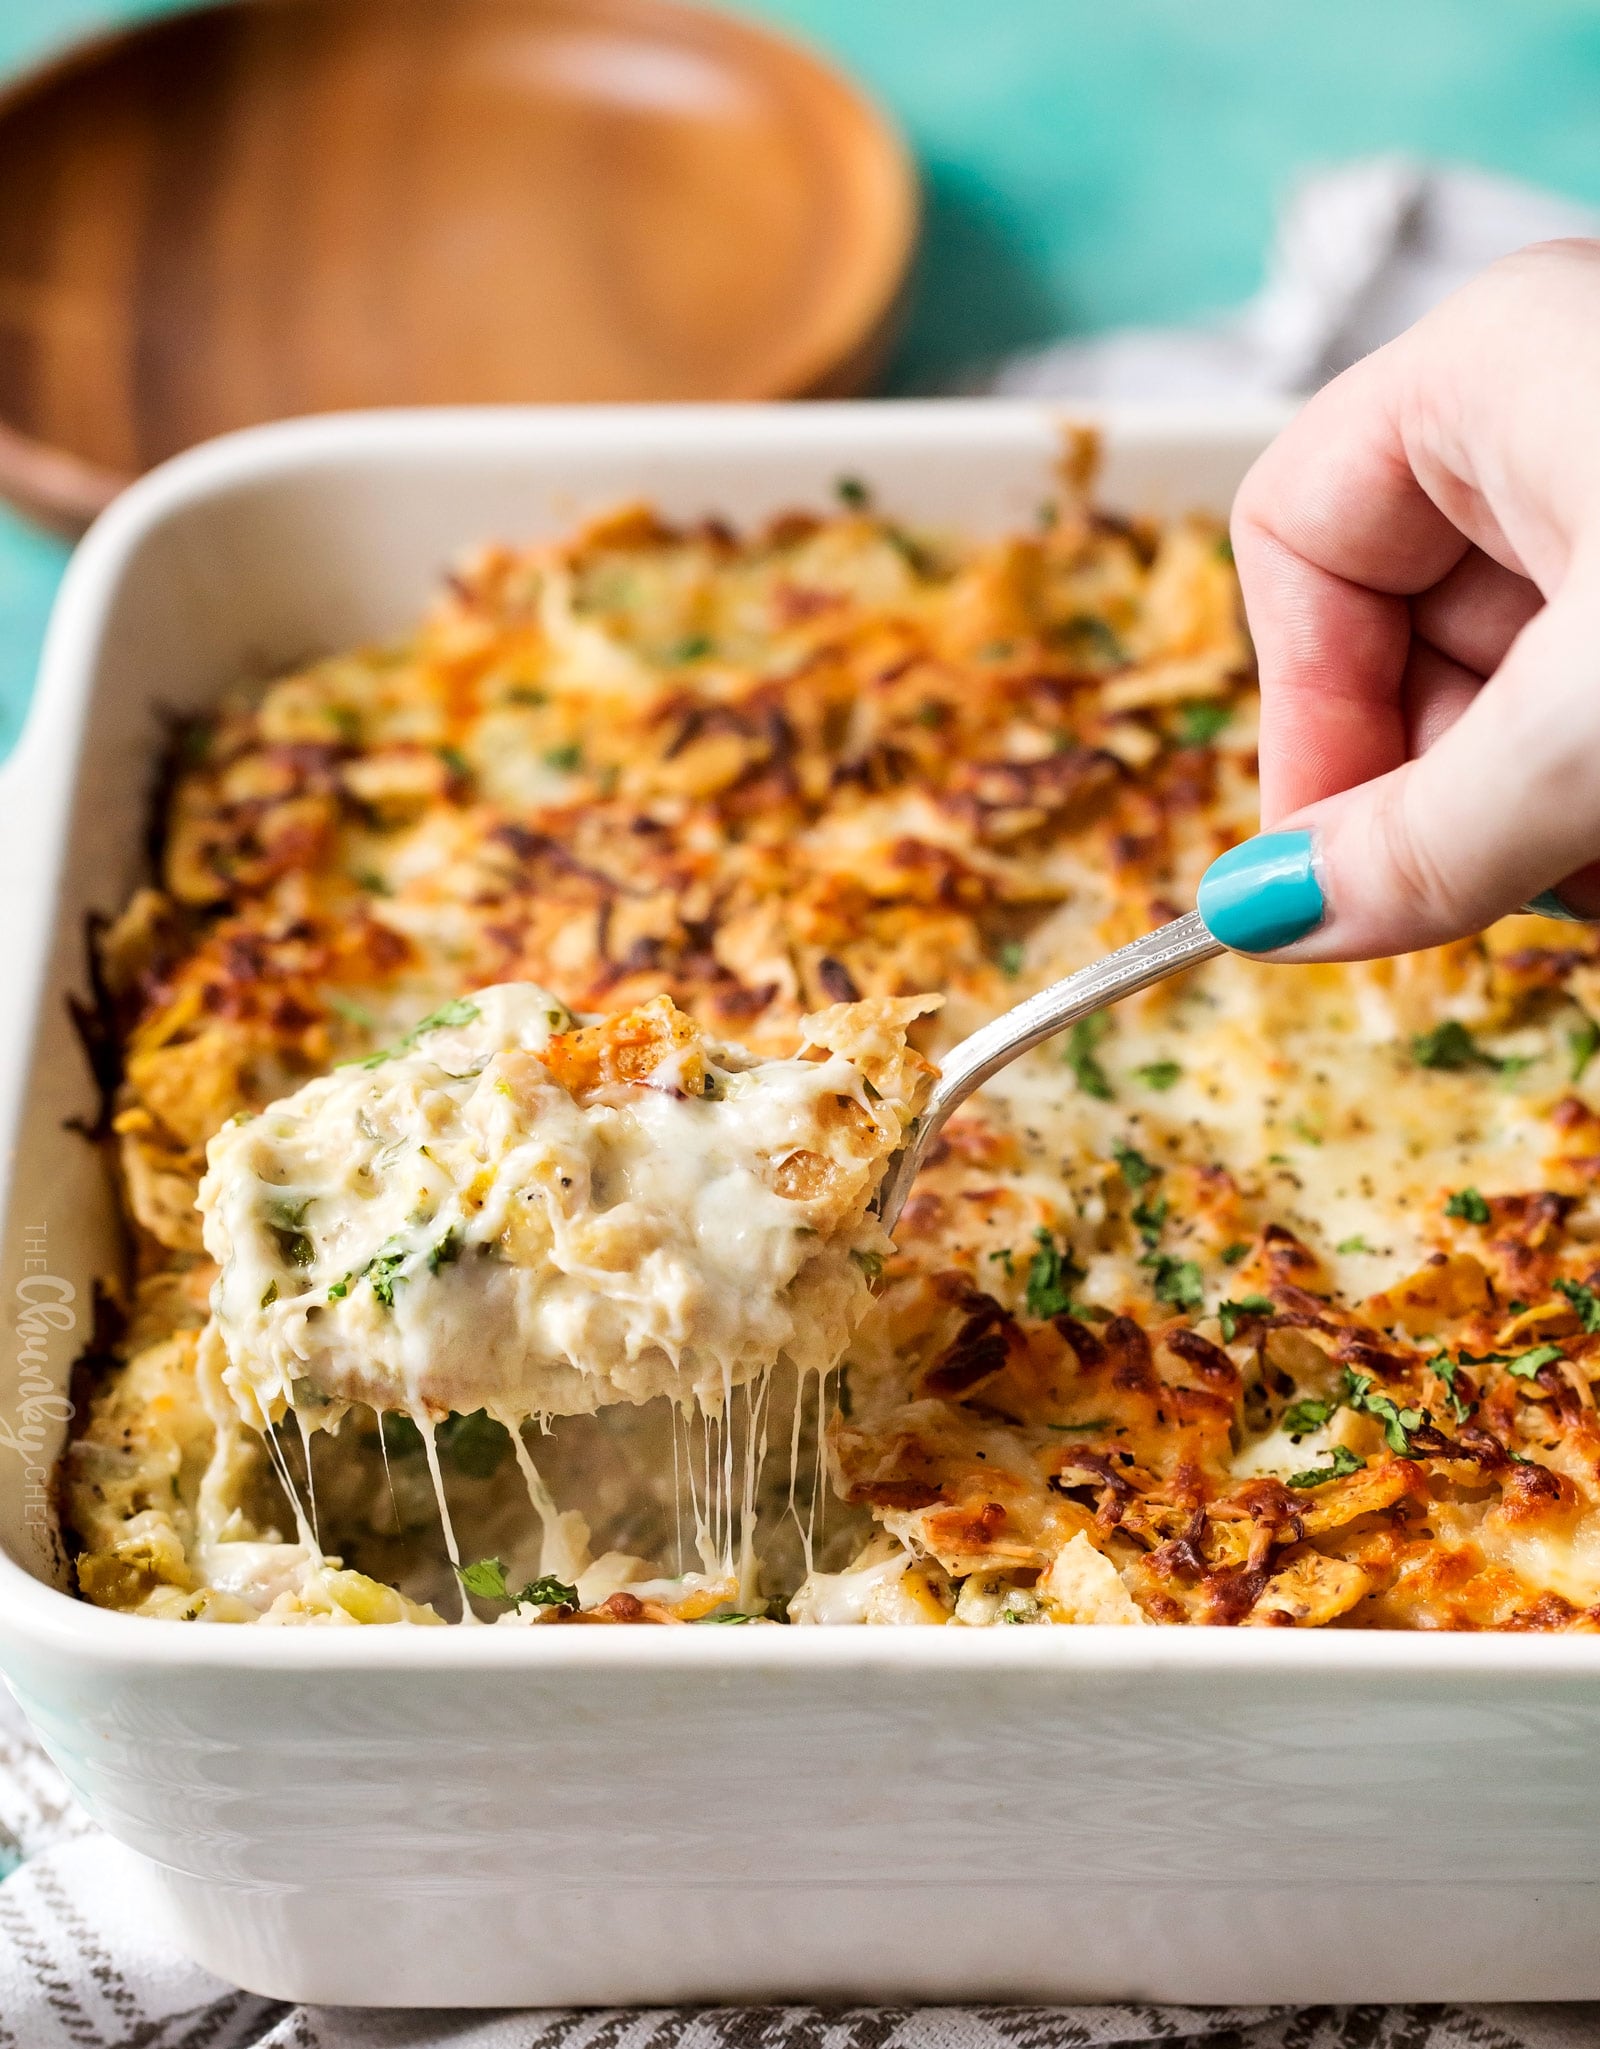 Cheesy Chicken Tortilla Casserole | A rotisserie chicken, creamy salsa verde sauce, plenty of gooey cheese and crunchy tortilla chips... it's the perfect casserole that's easy to prep ahead for a weeknight dinner! | http://thechunkychef.com